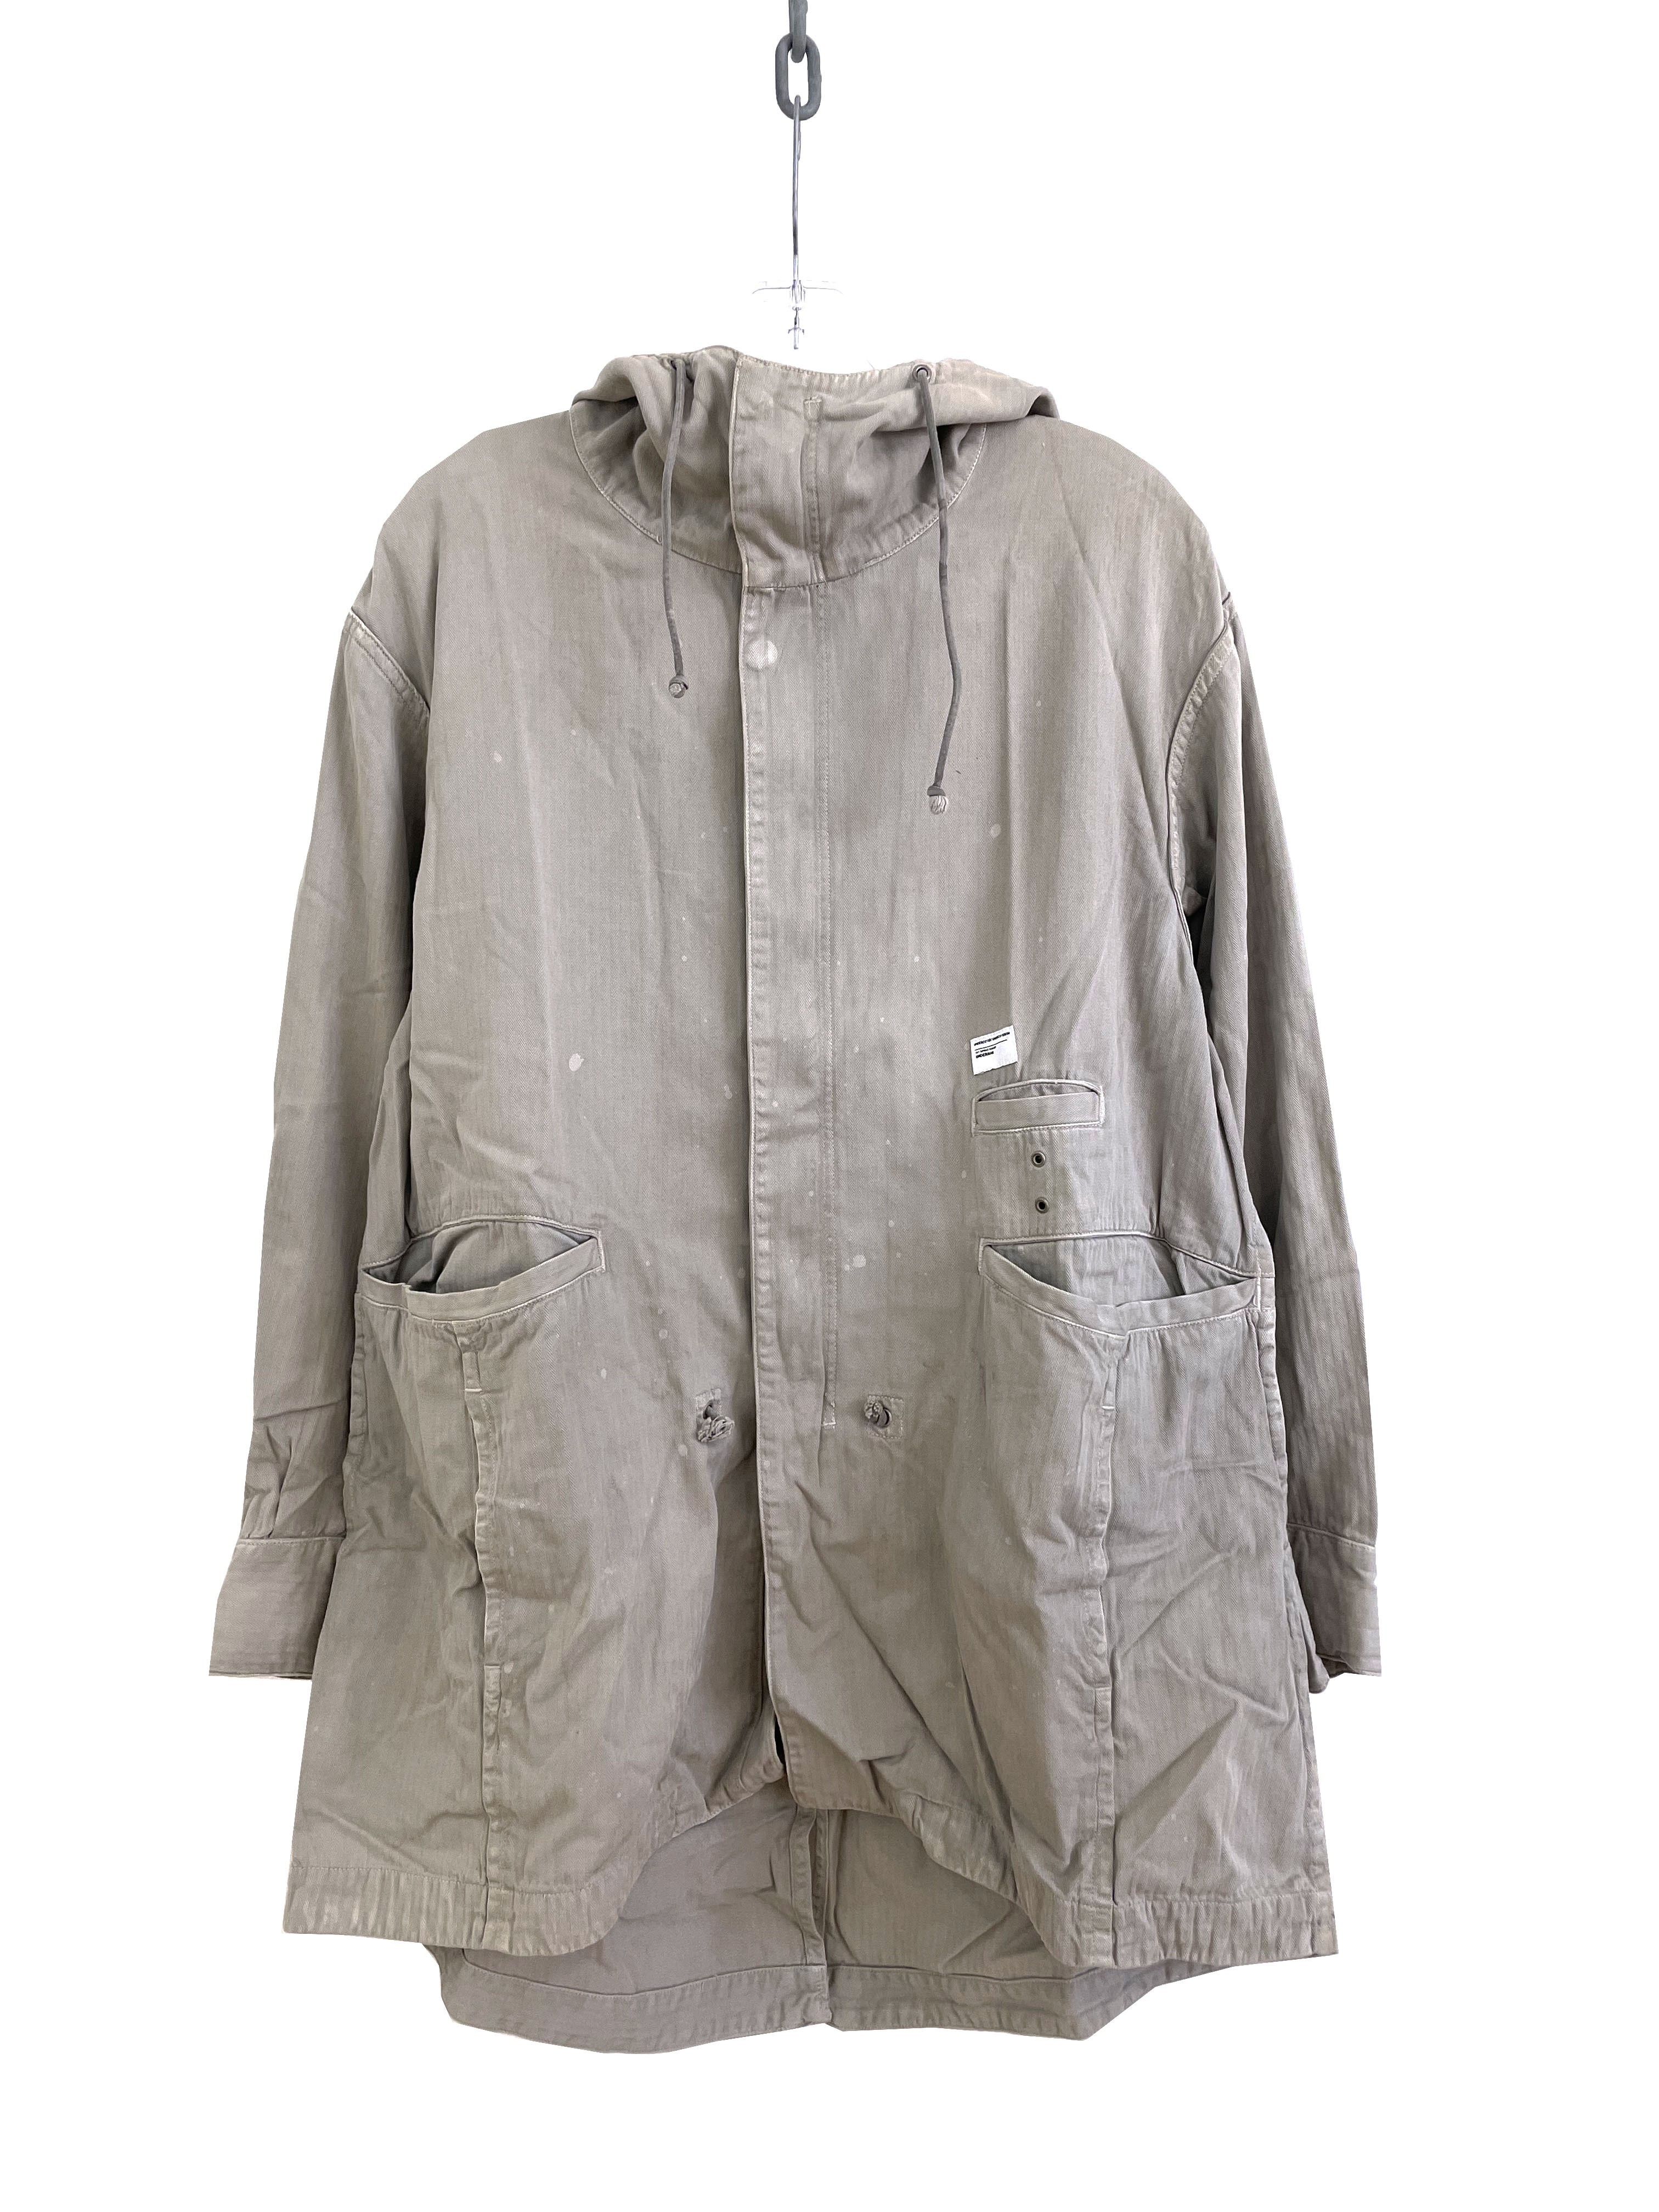 SS11 Underman I Want More Can Parka - 5